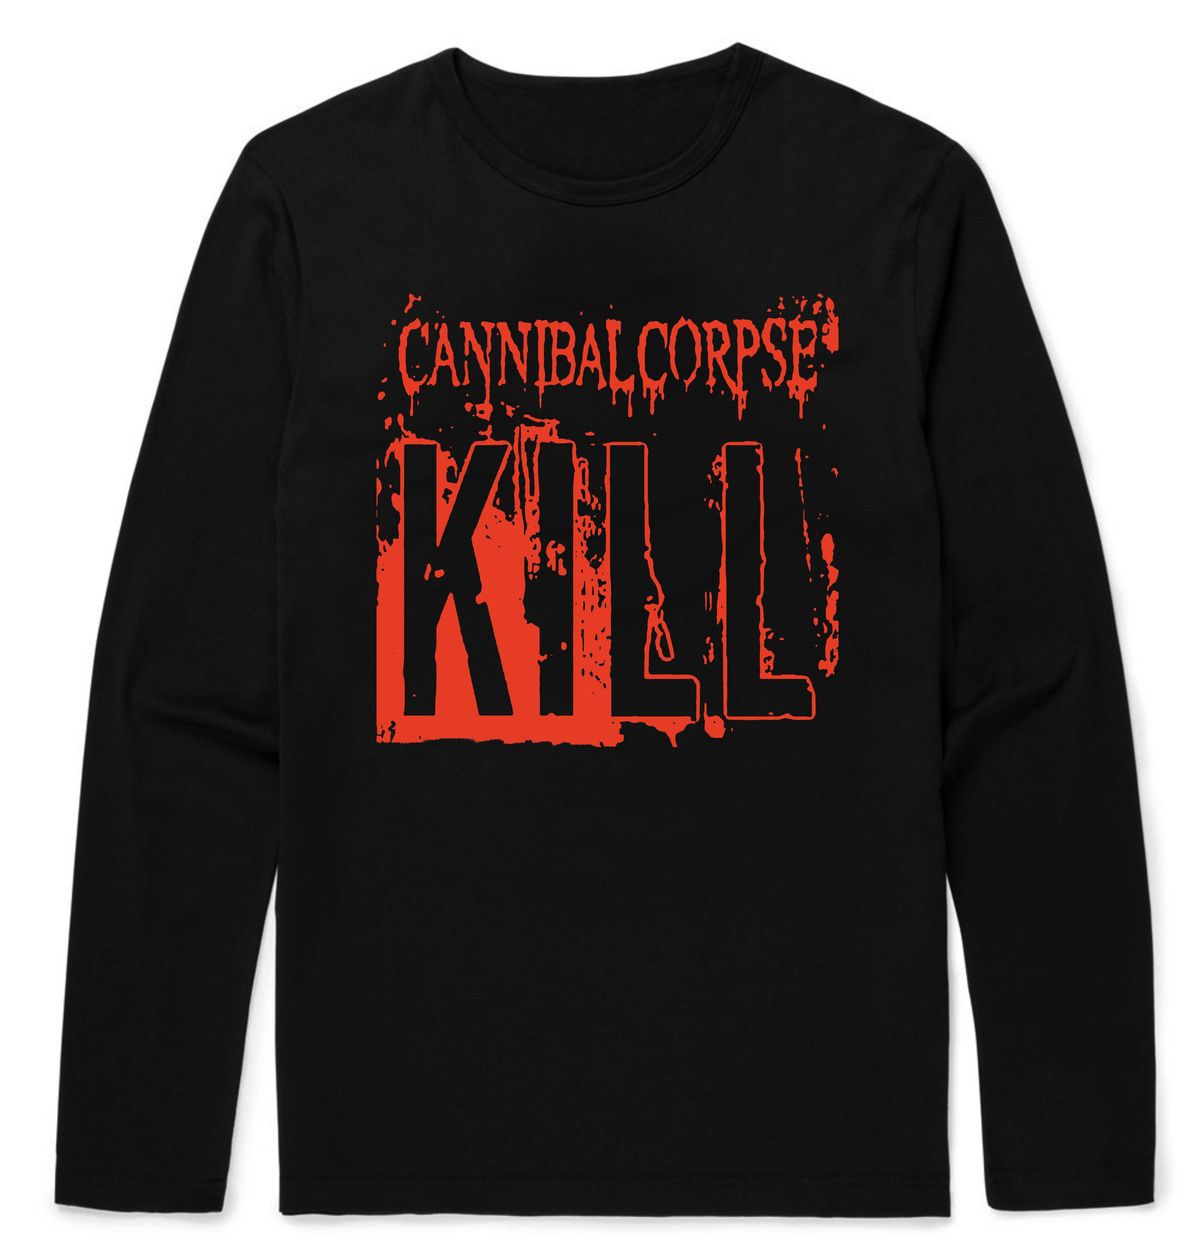 Cannibal Corpse Band Hoodie, Cannibal Cannibal Corpse - Ribcage T-Shirt V.....